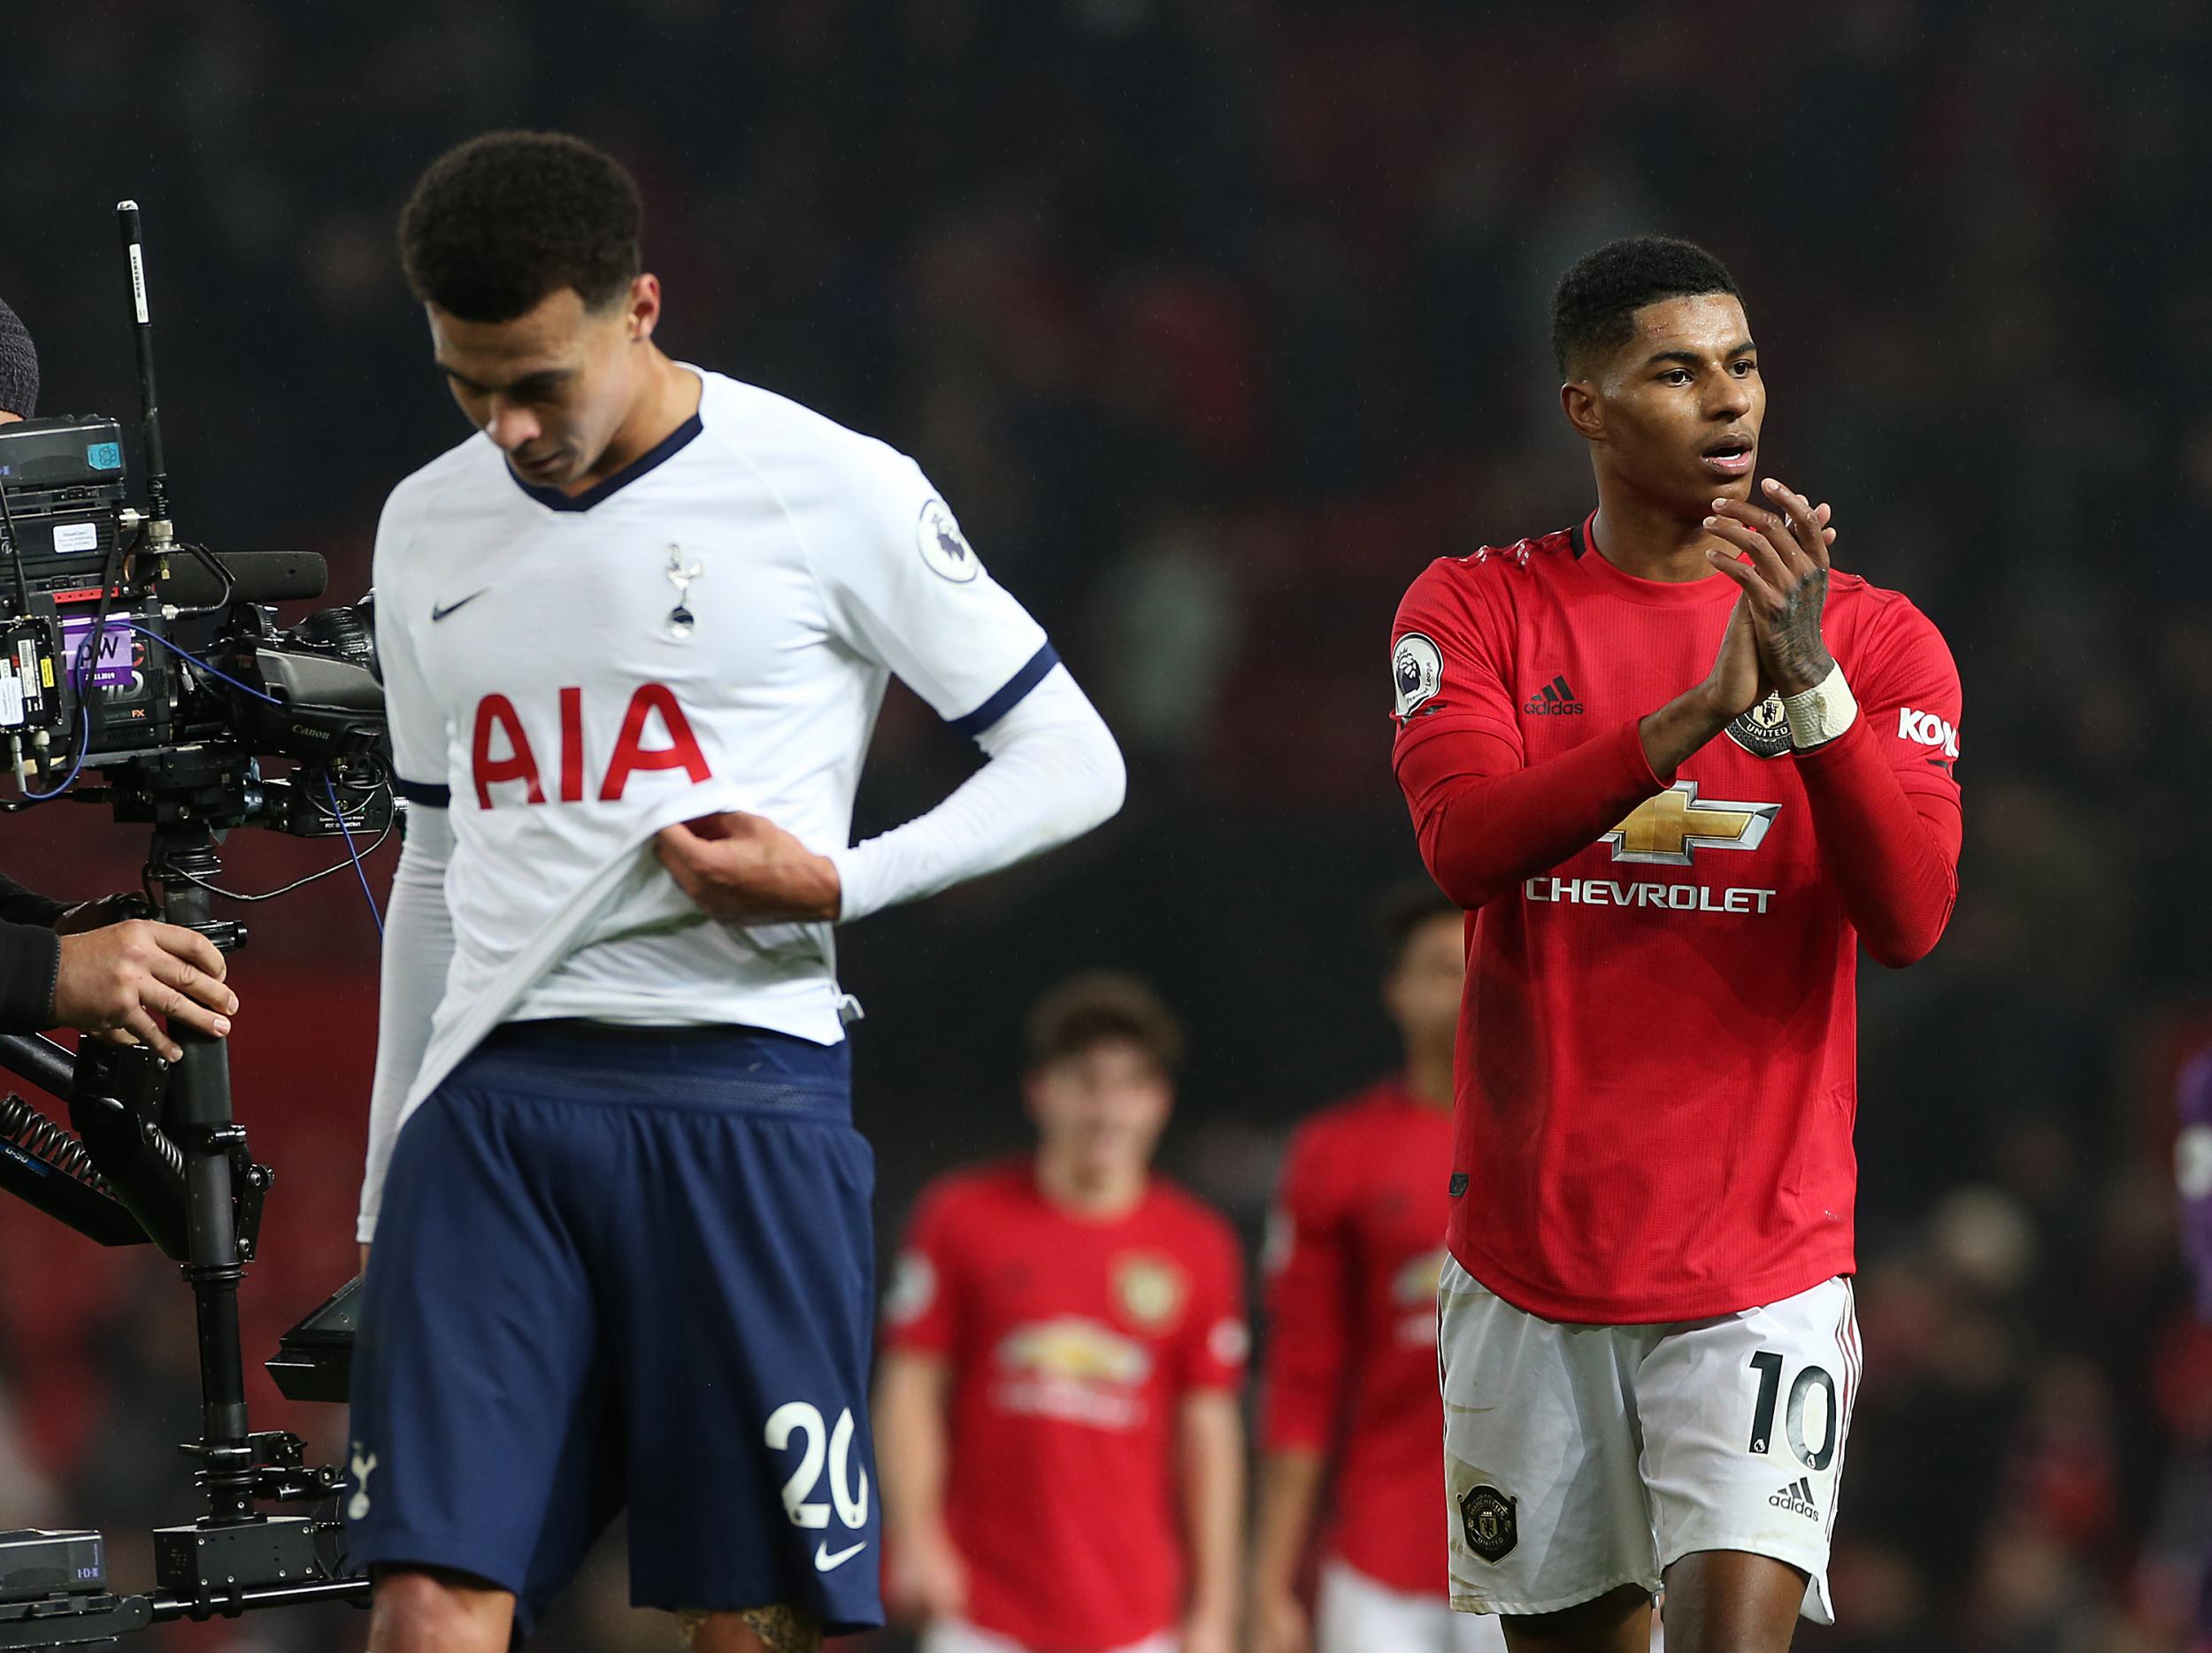 Spurs vs Manchester United will be one of the first games back